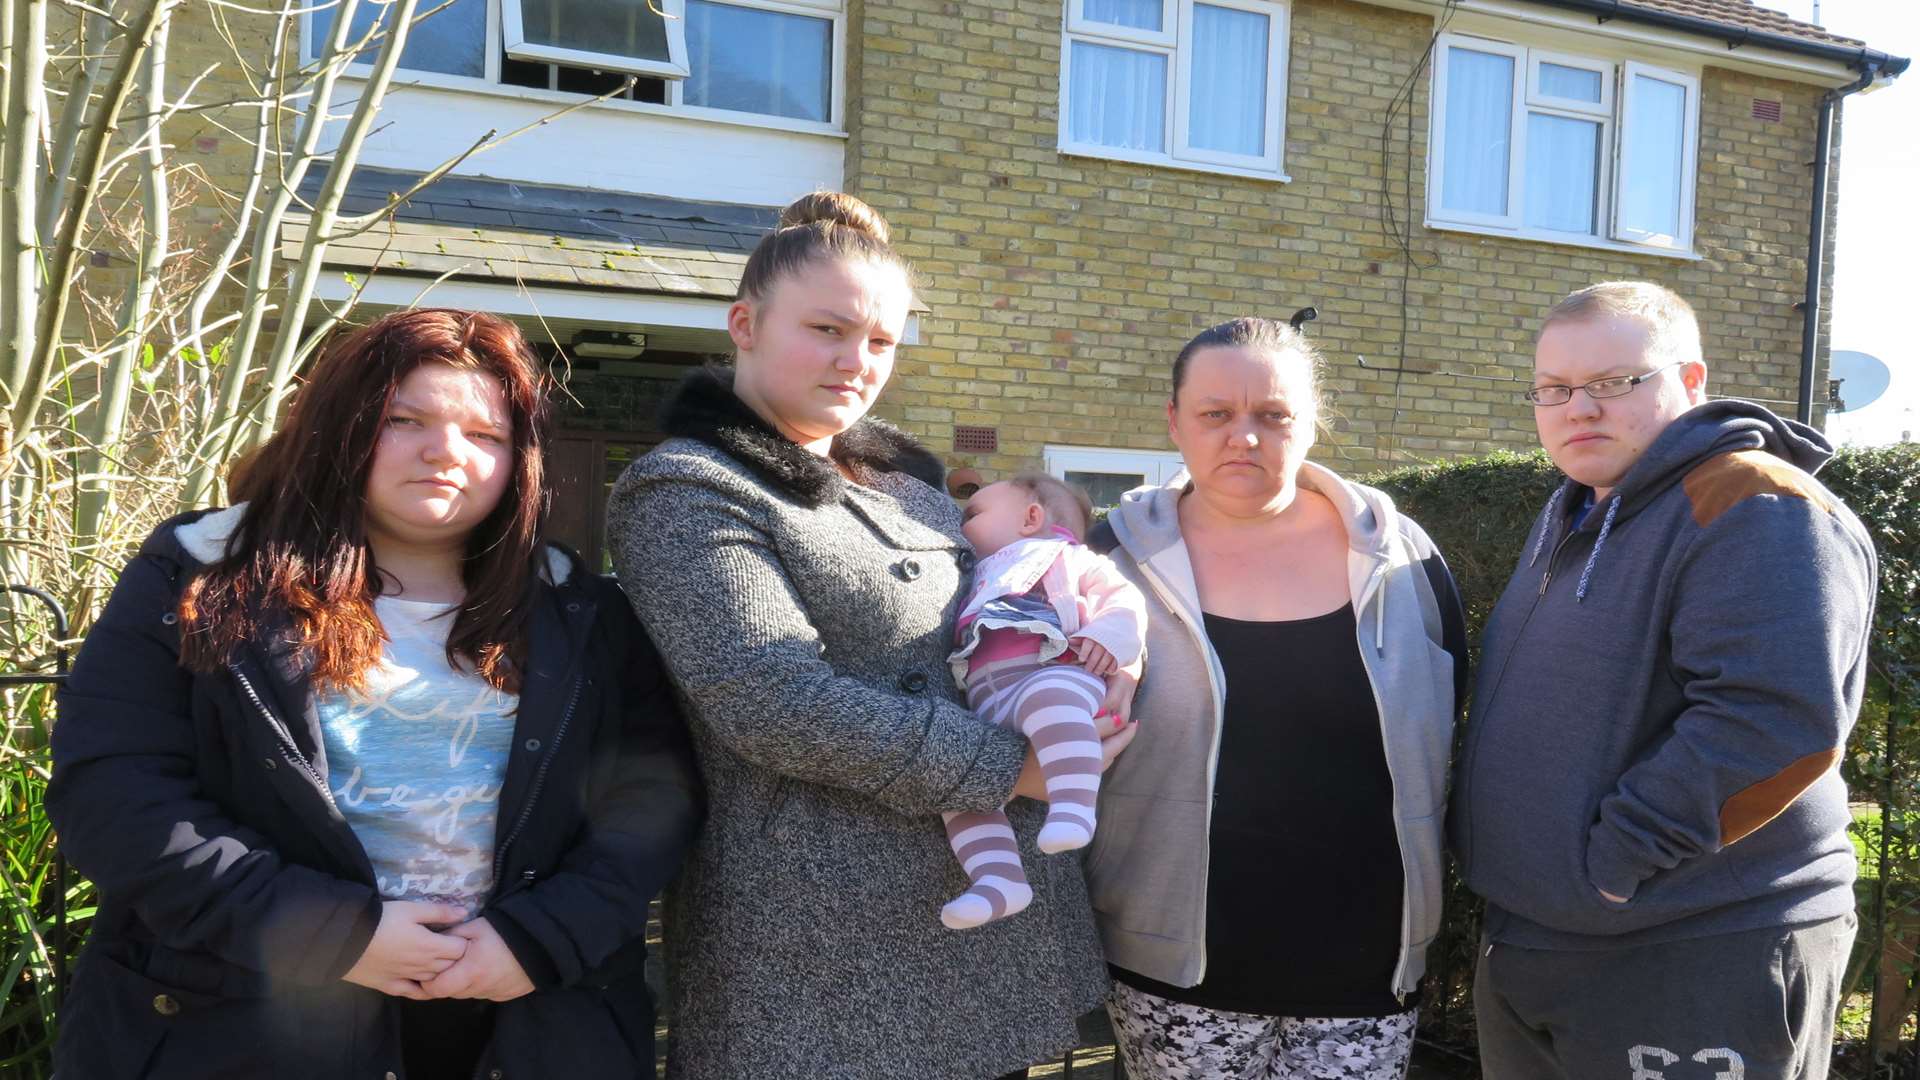 Courtney Aitcheson, 16, Shannan Copper, 20, with baby Karaleigh, Laura Aitcheson, 42, and Liam Jackson who had to flee their smoke-filled flat